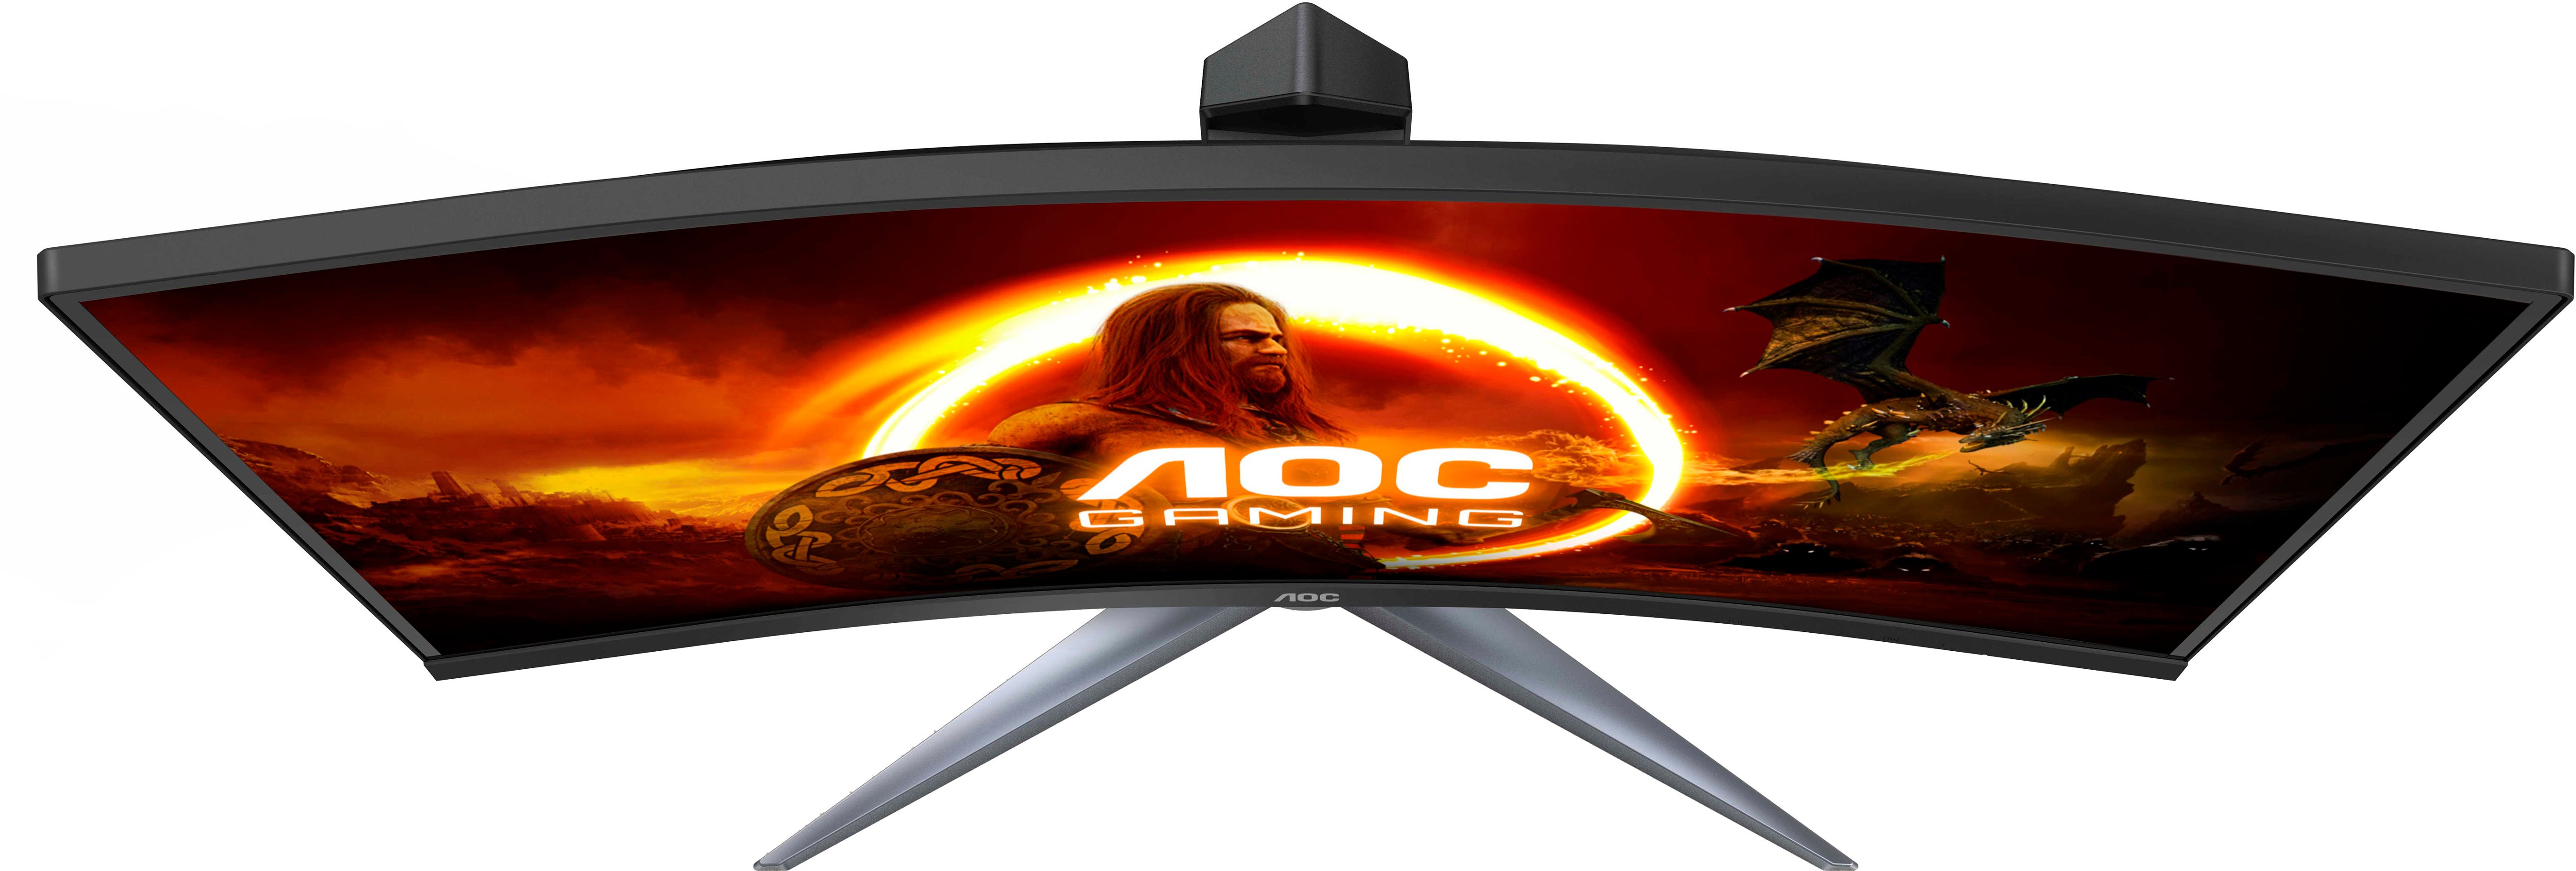 AOC CQ32G3SU: An affordable 1440p curved gaming monitor